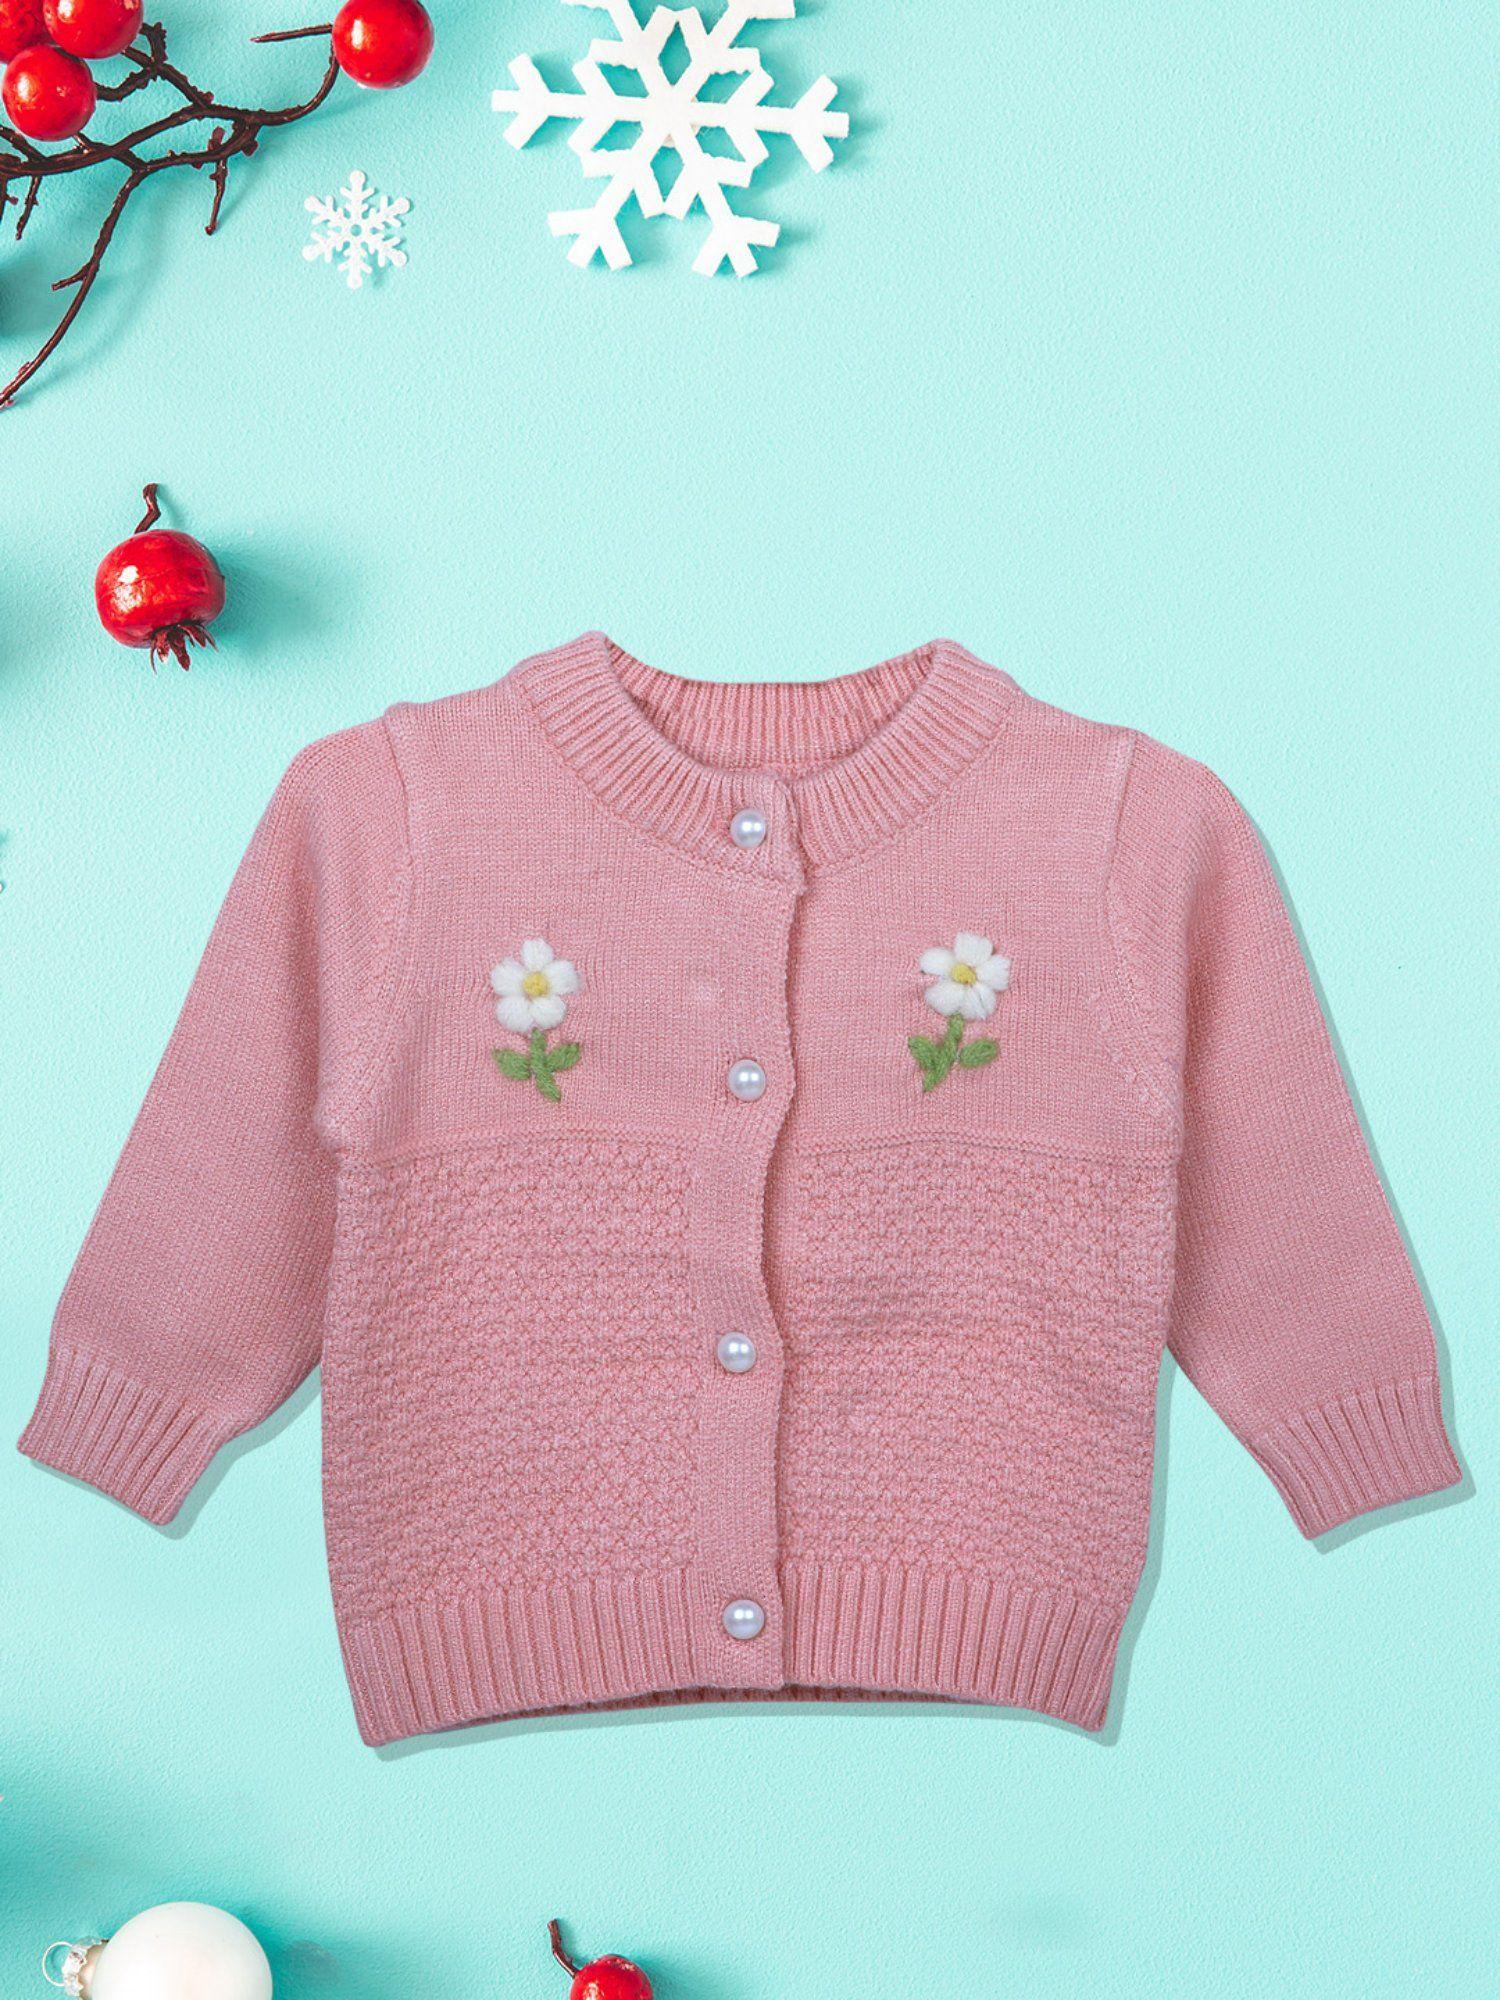 floral embroidery premium full sleeves knitted sweater pink